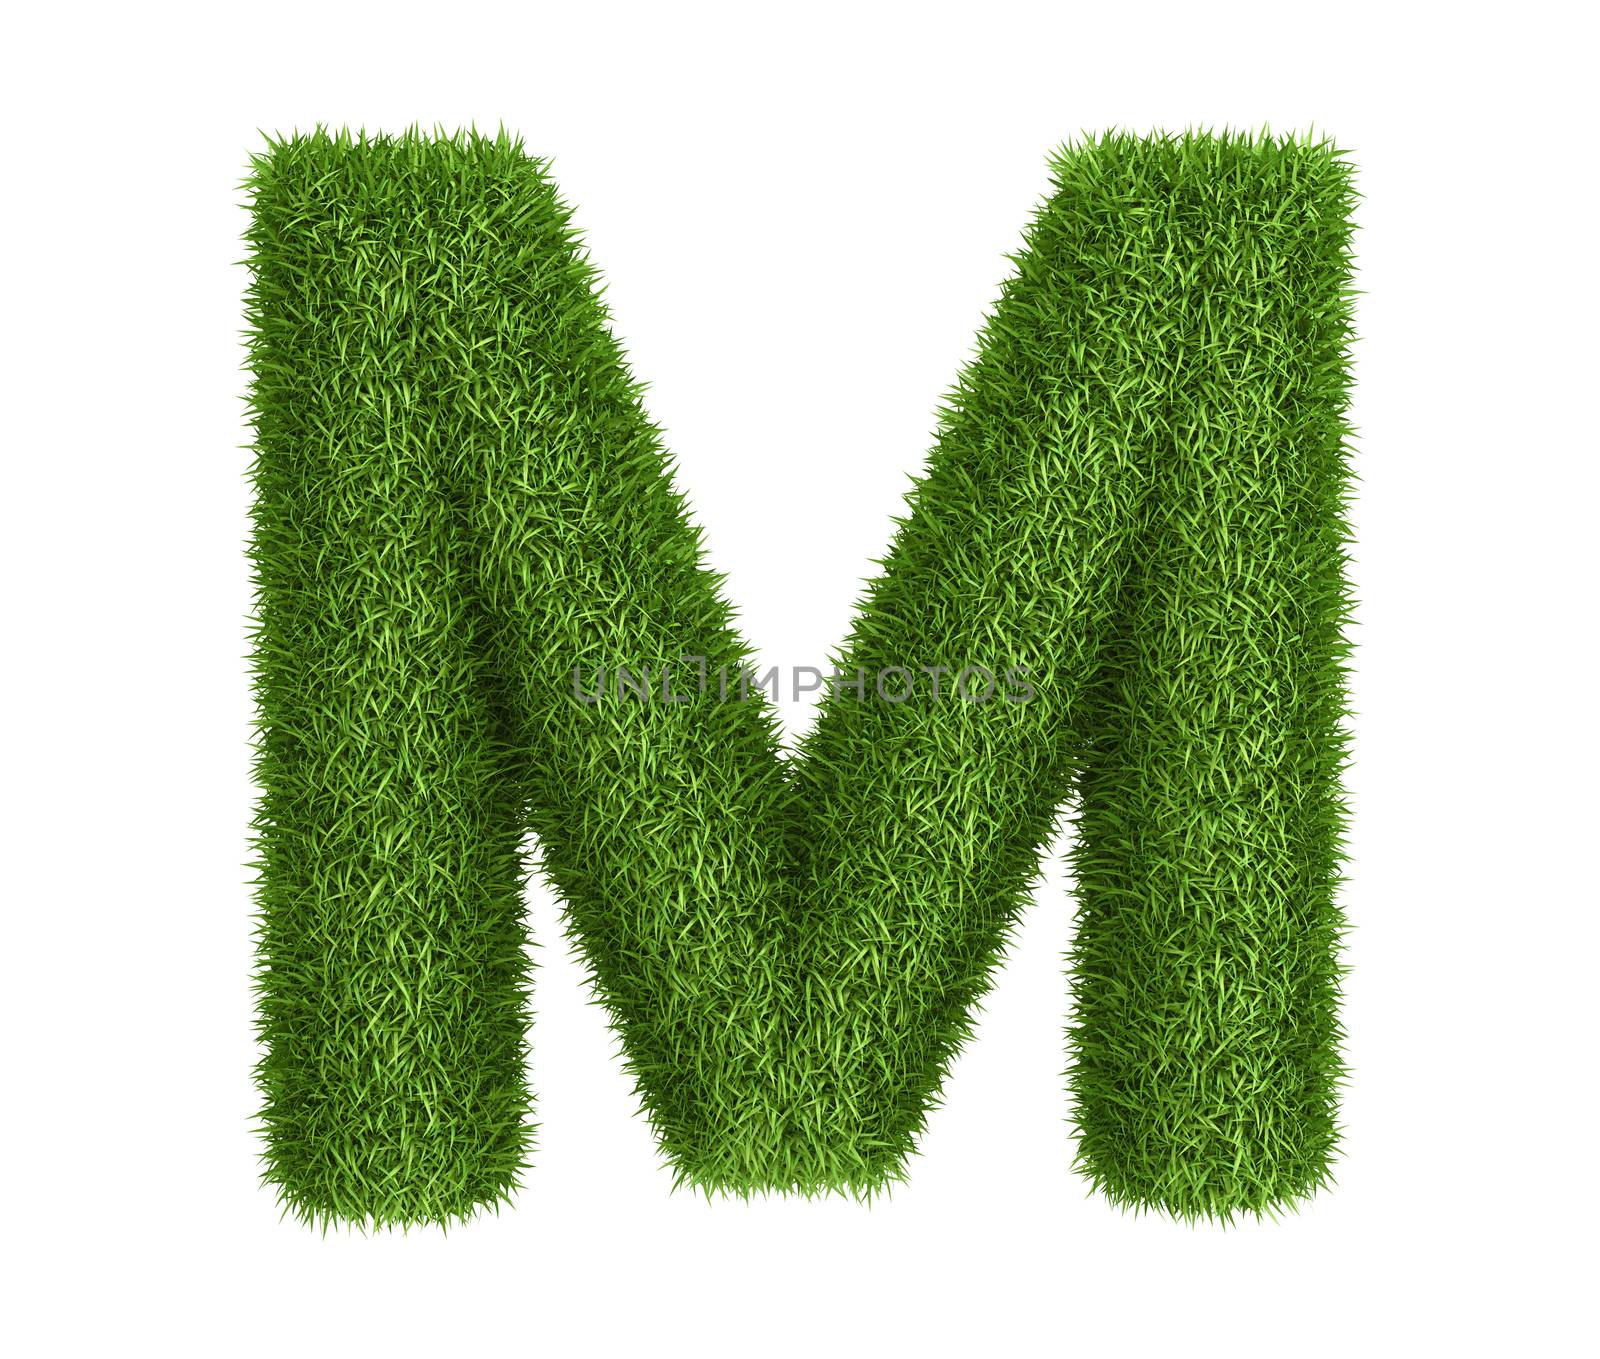 Natural grass letter M by iunewind